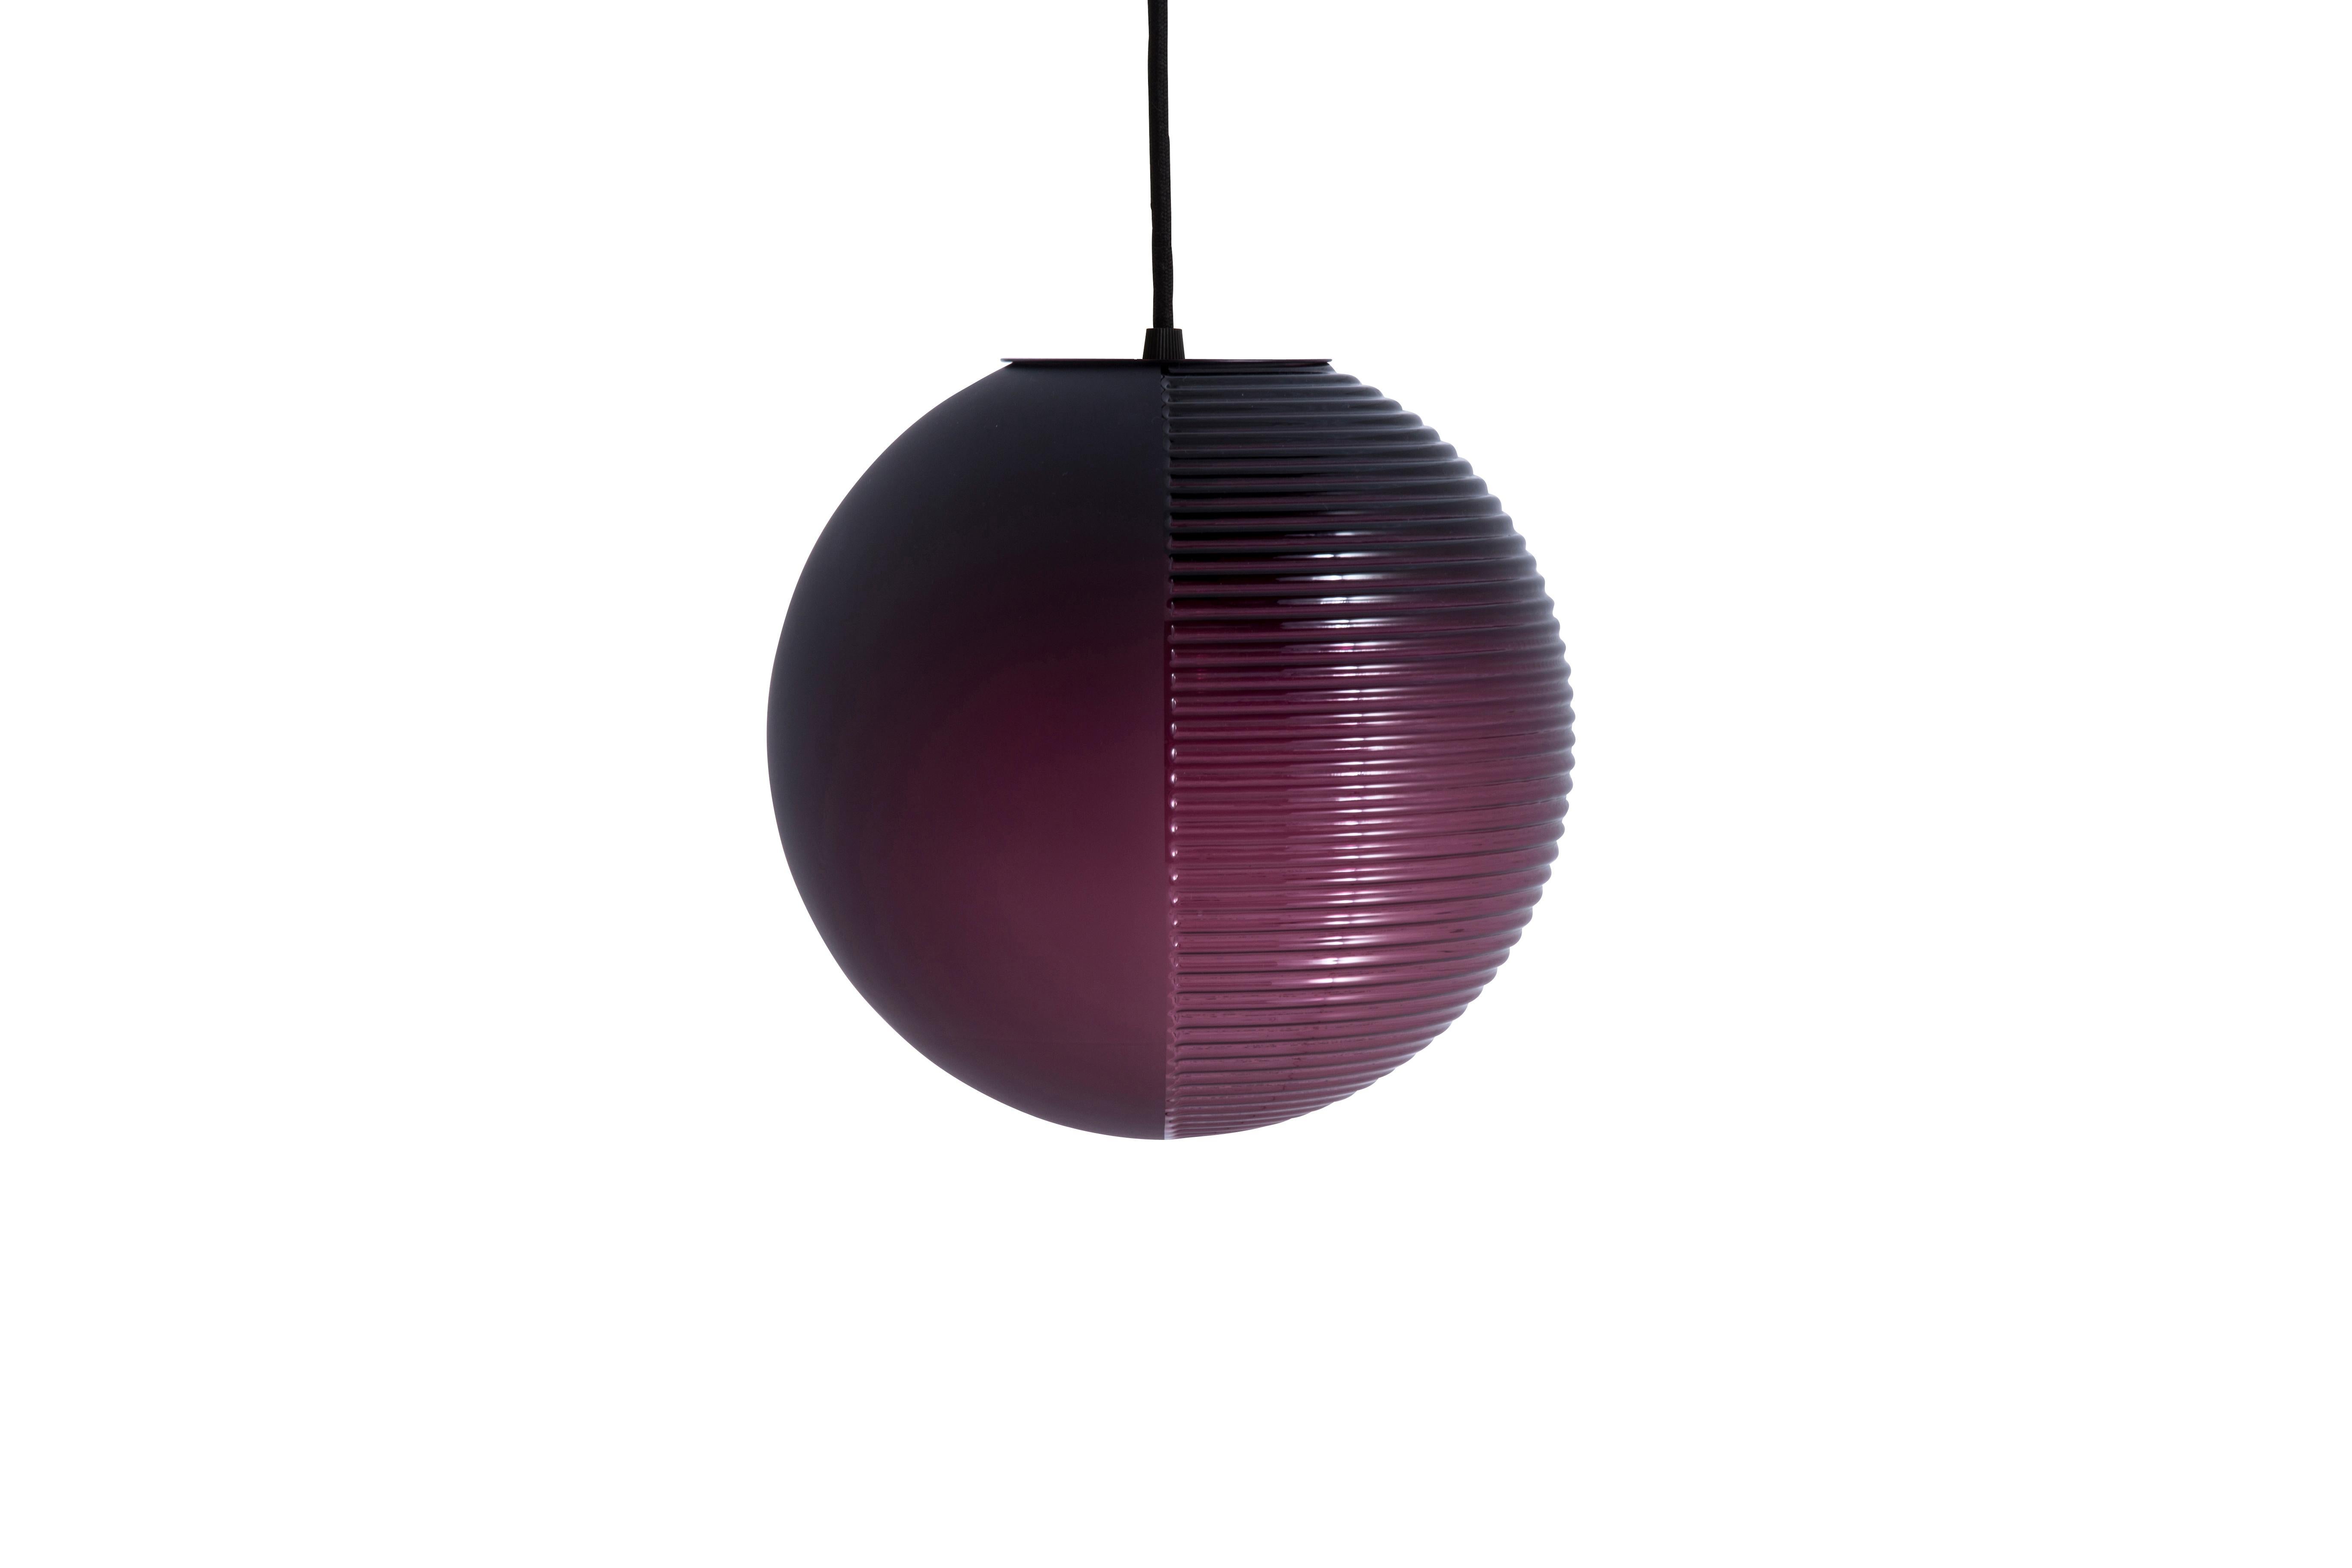 Stellar medium Aubergine Acetato Aubergine pendant by Pulpo.
Dimensions: D31 x H320 cm.
Materials: handblown glass coloured, stainless steel wire, textile cable.

Also available in different finishes: aubergine acetato aubergine, smoky grey